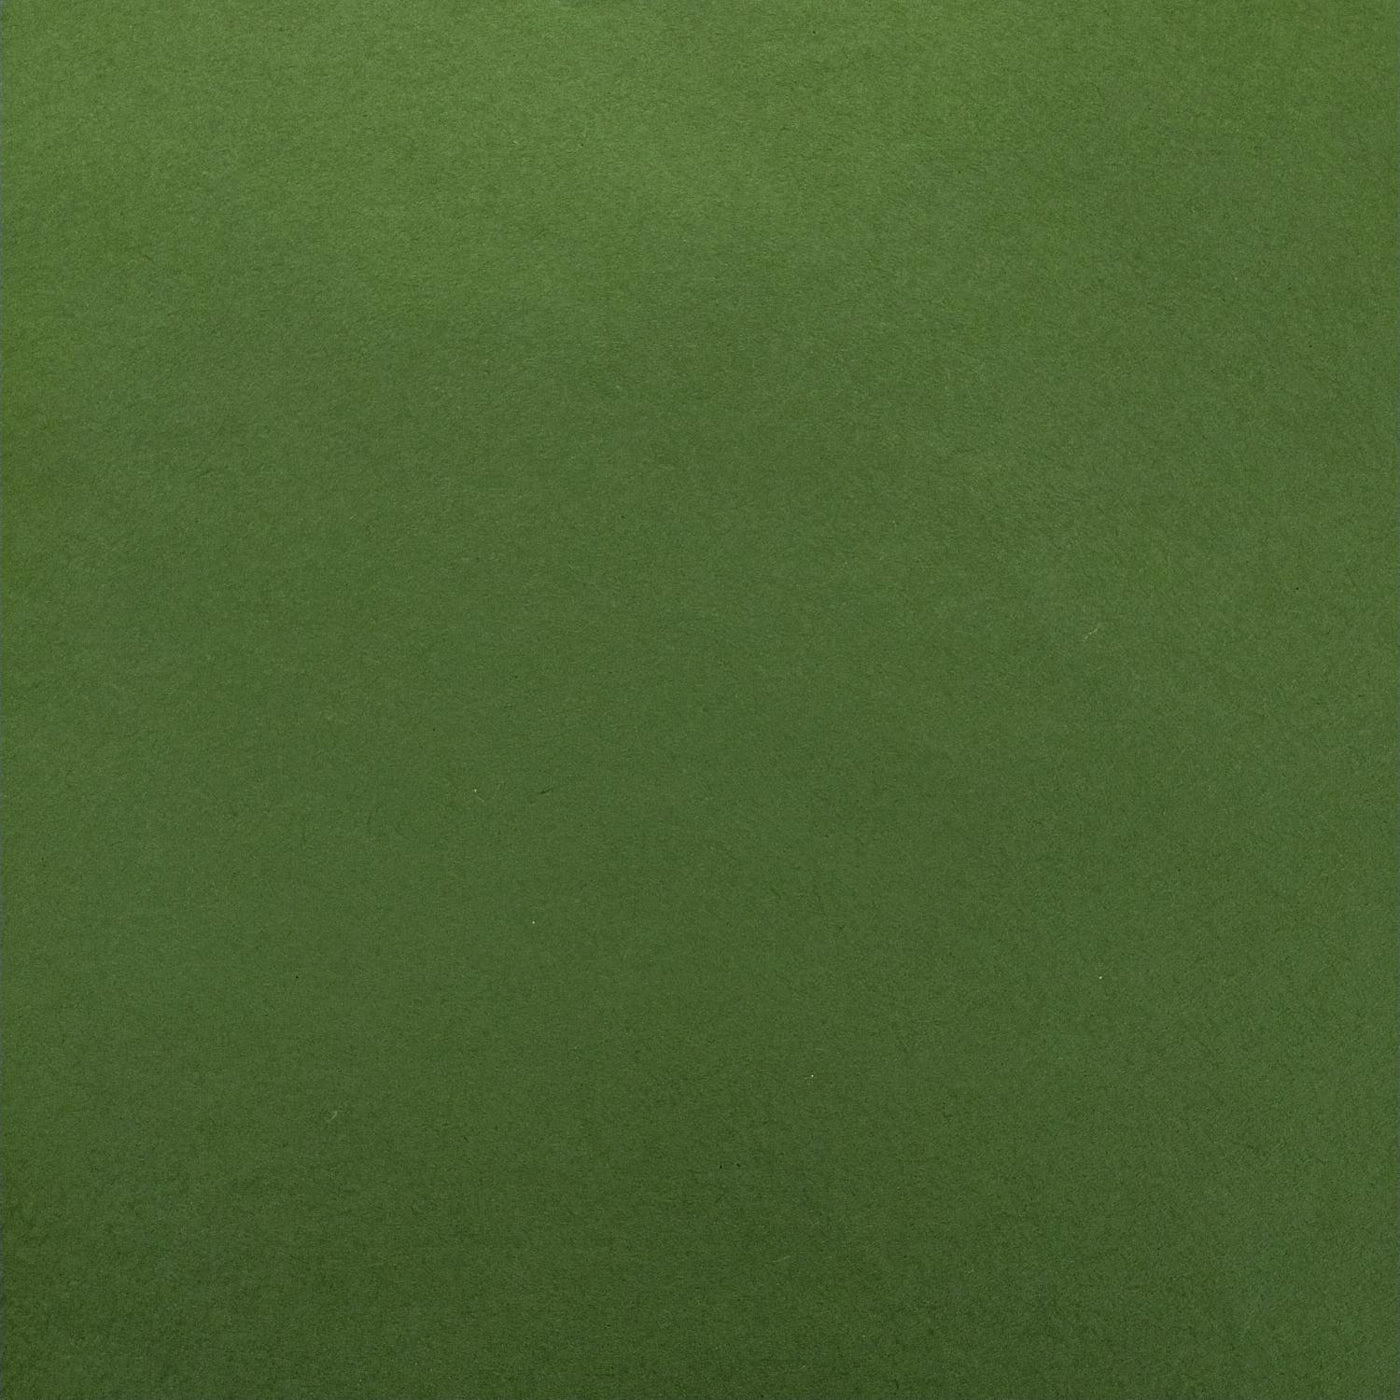 Solid-Colored Kozo Mulberry Paper (Fern Green)